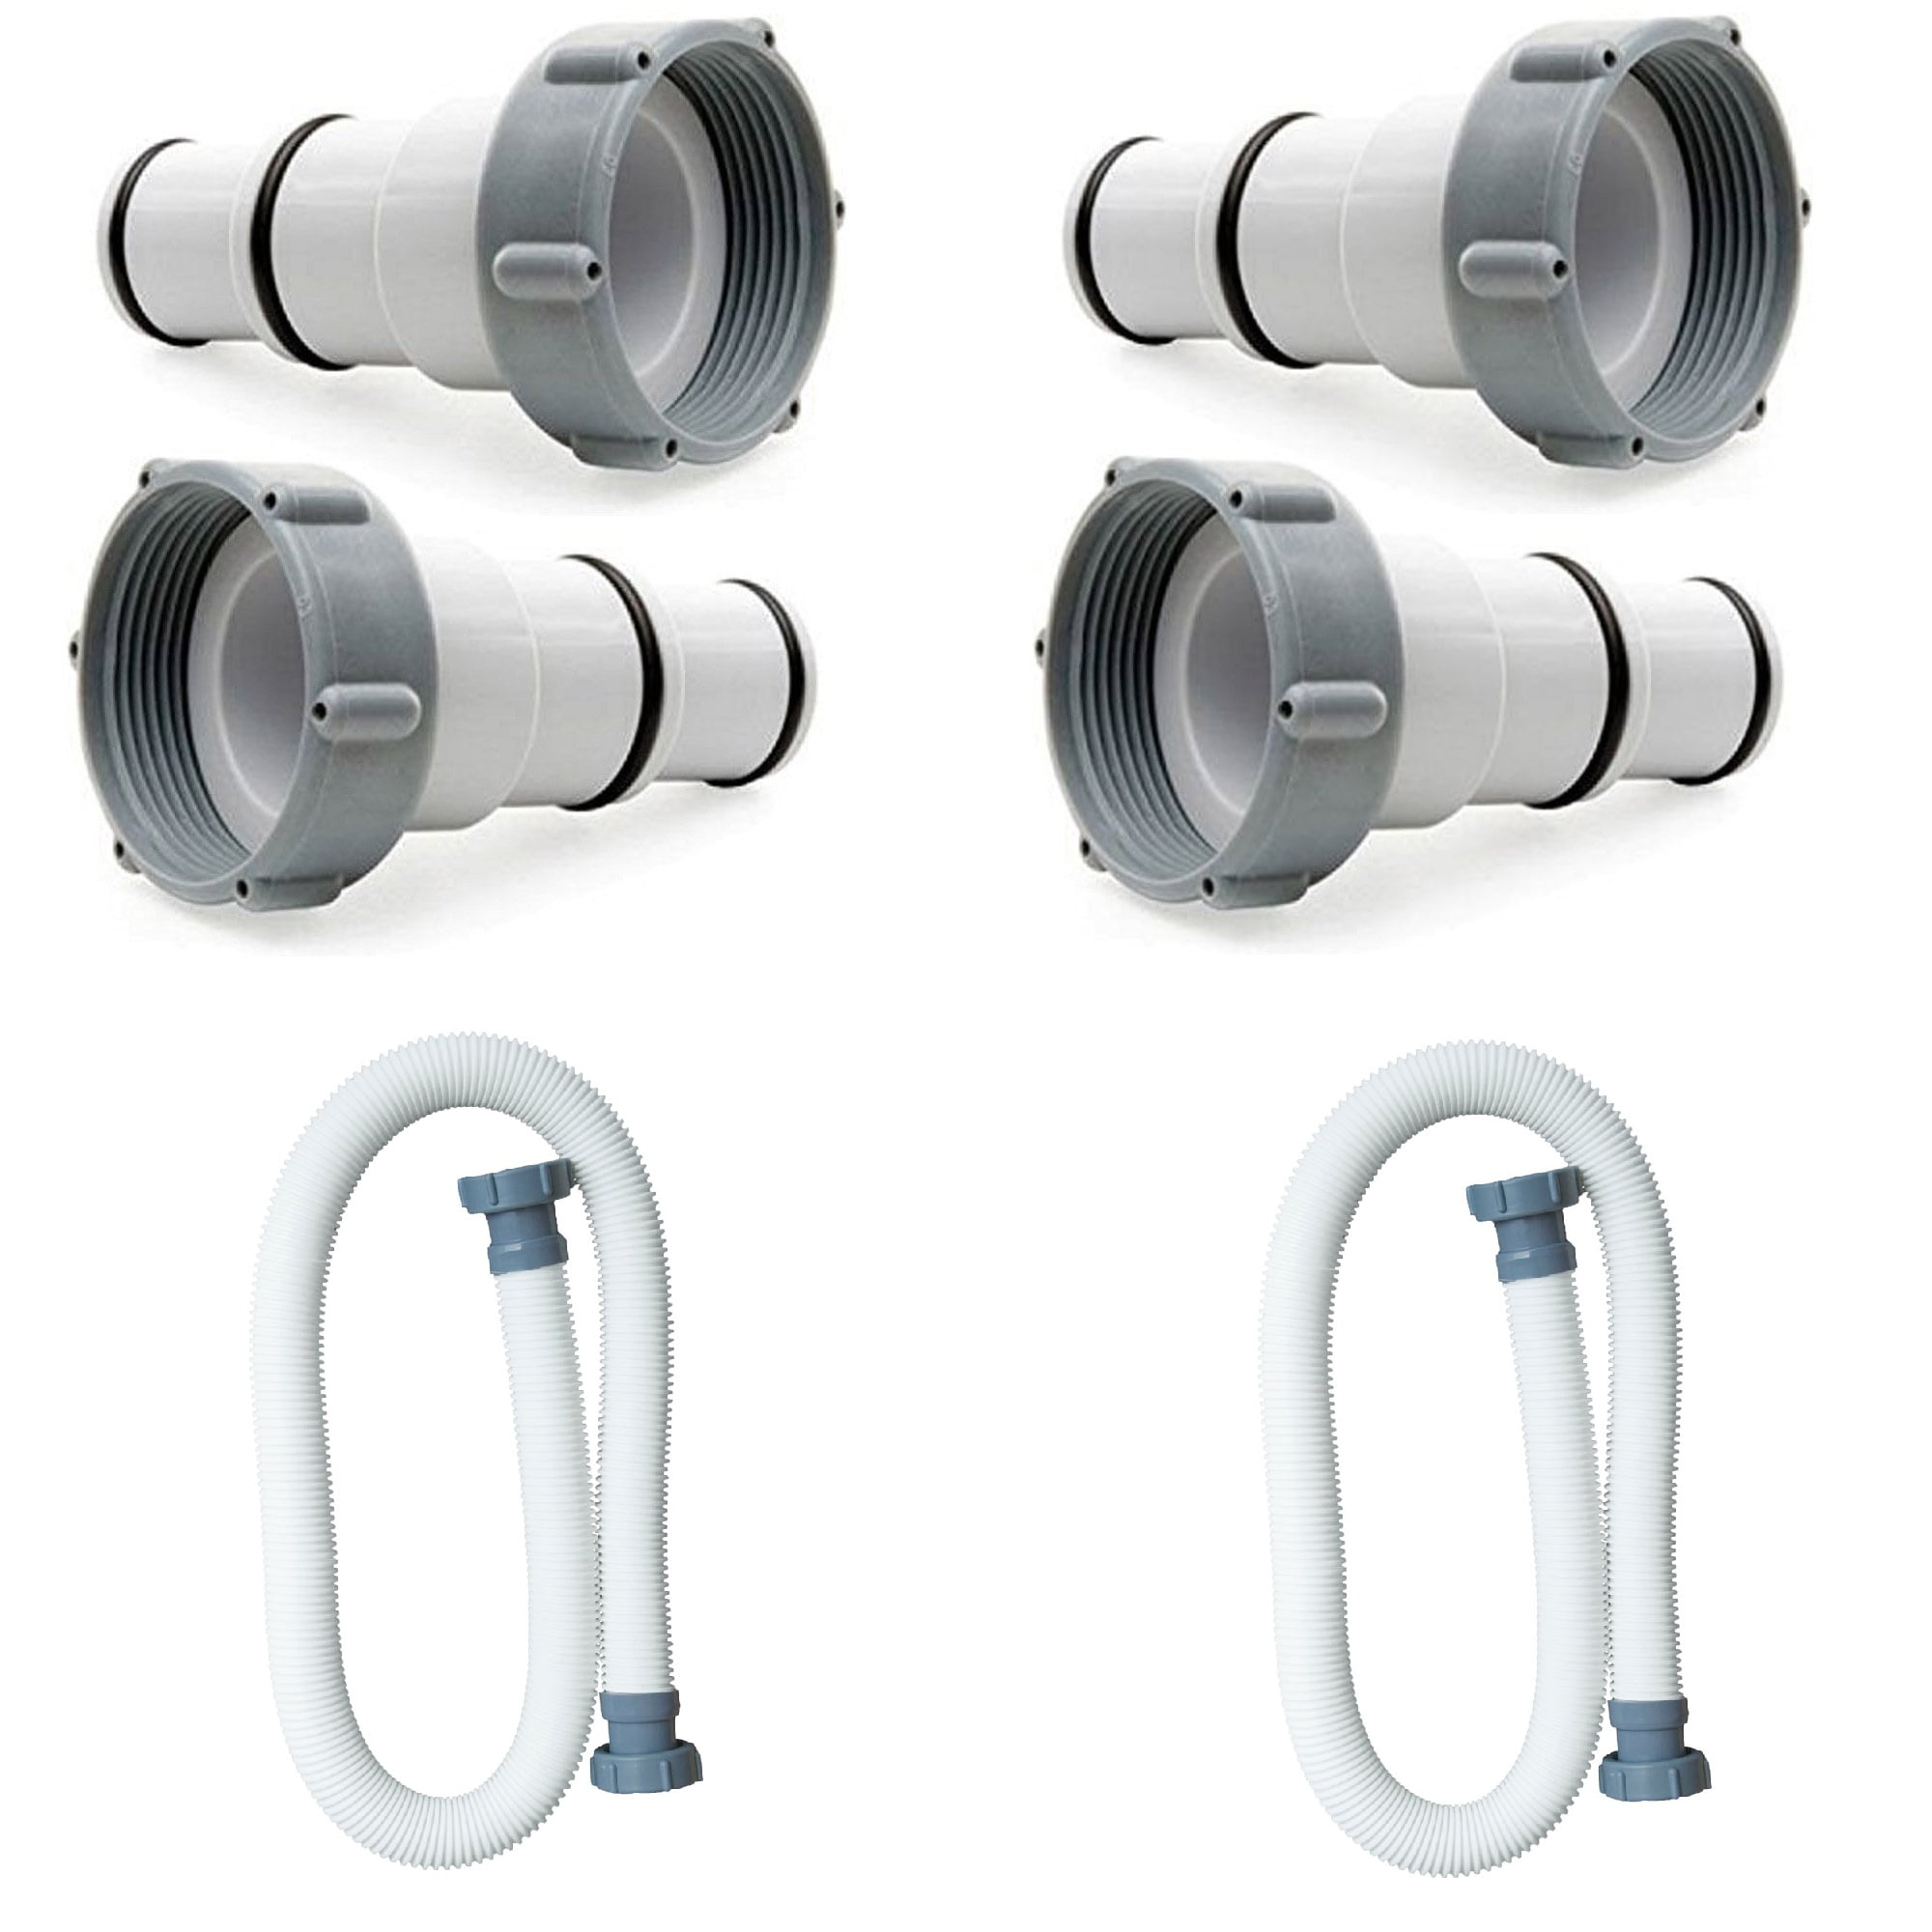 Details about   Intex Adapter B w/collar for Filter Pump & Saltwater Above Ground Swim Pool 2 pk 